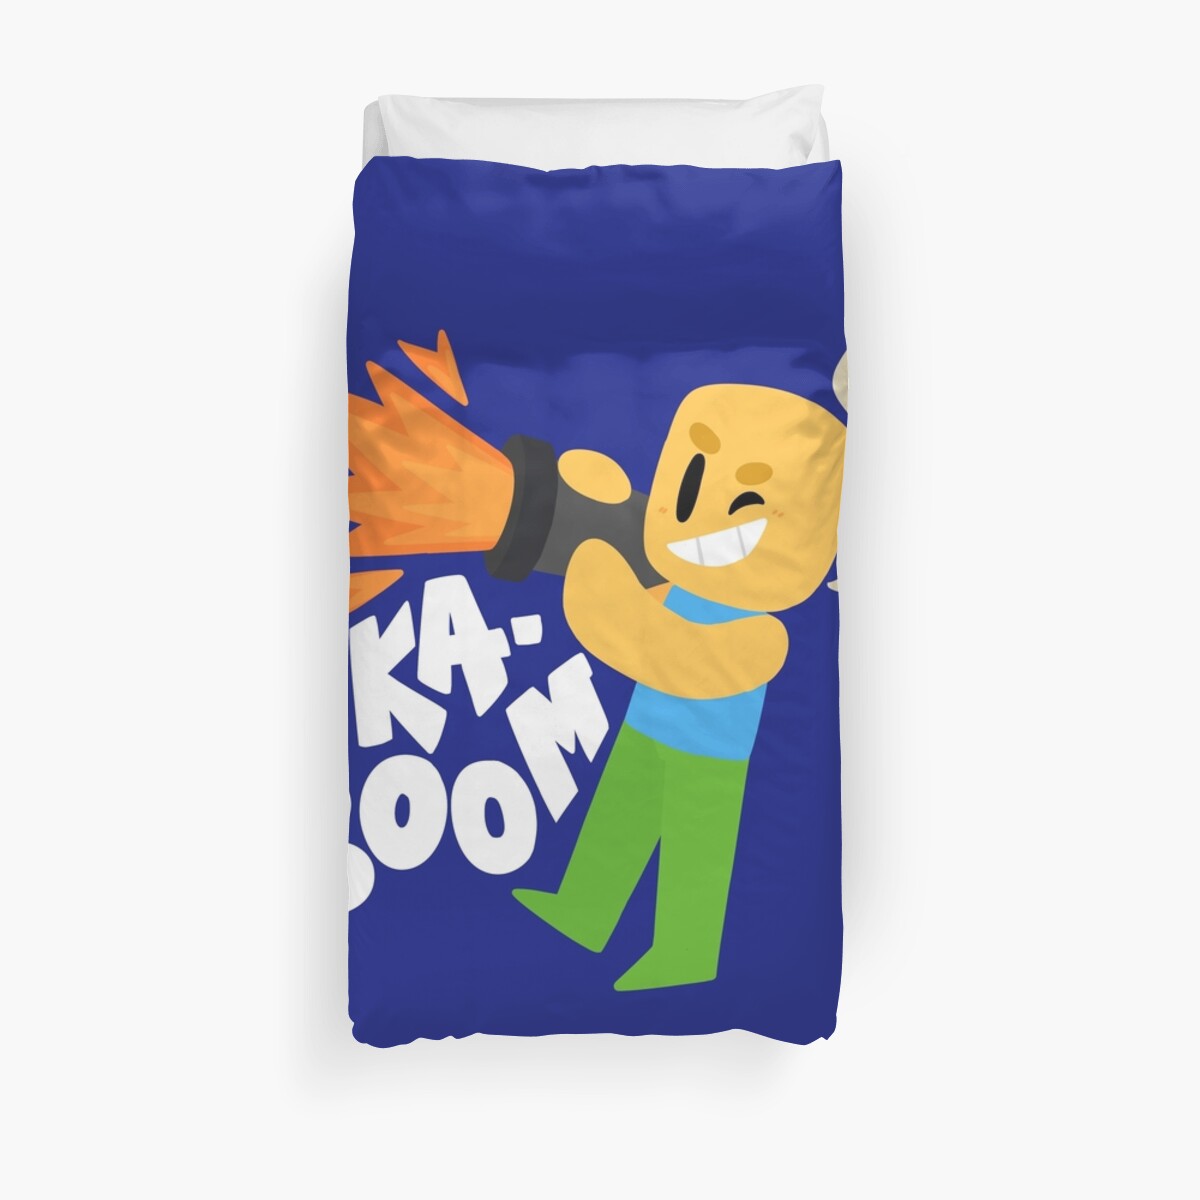 Kaboom Roblox Inspired Animated Blocky Character Noob T Shirt - amazing noob oof pants roblox